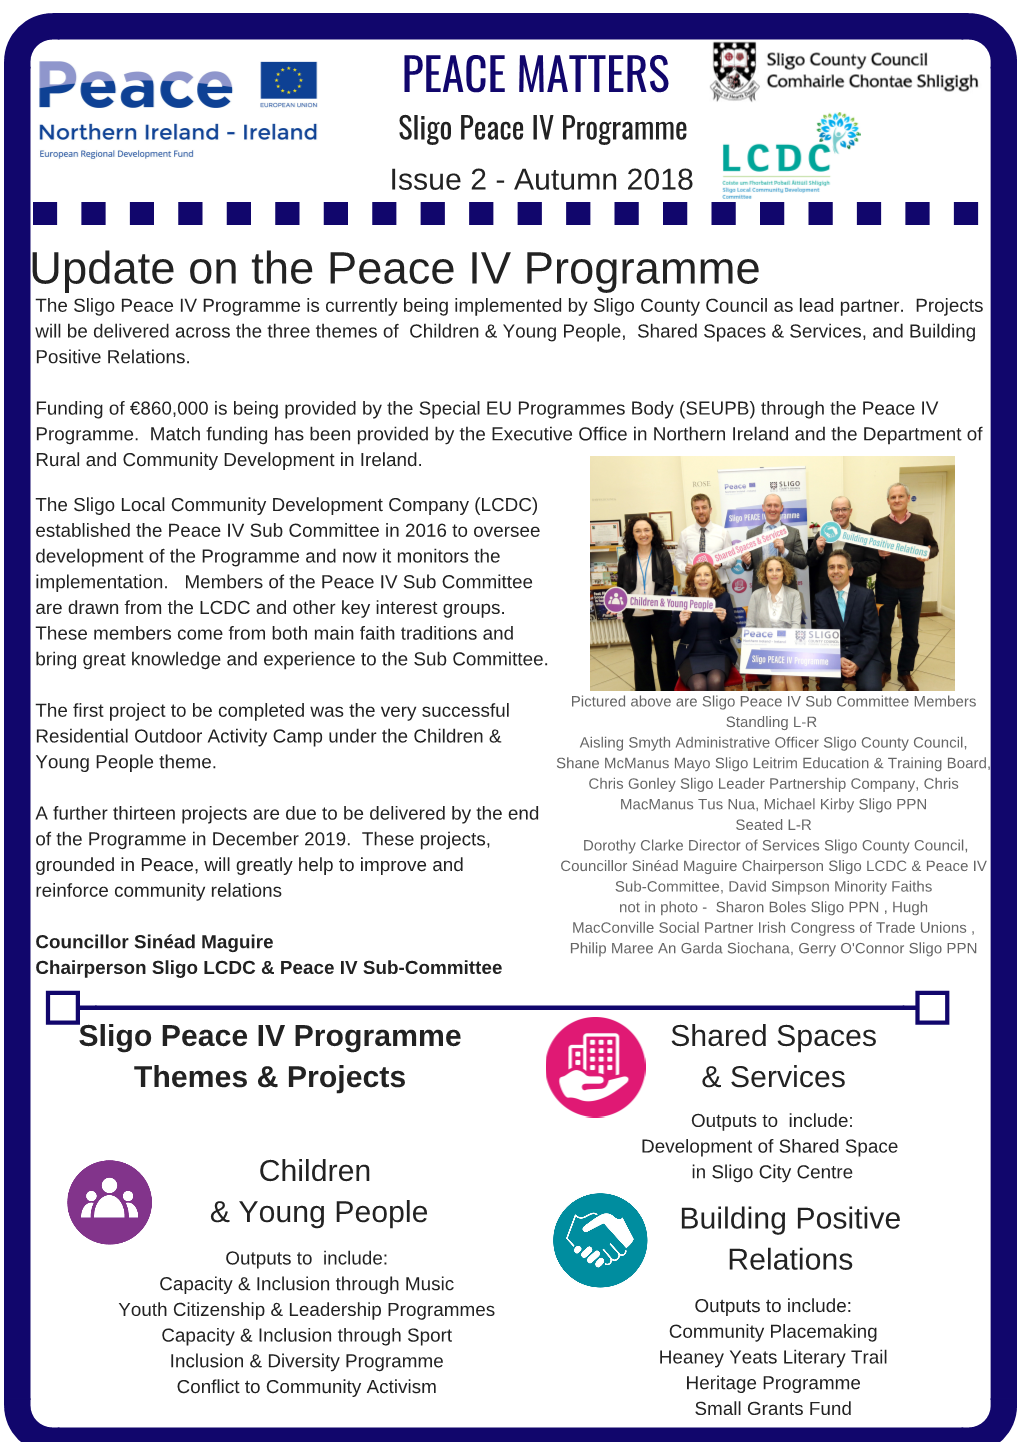 Update on the Peace IV Programme